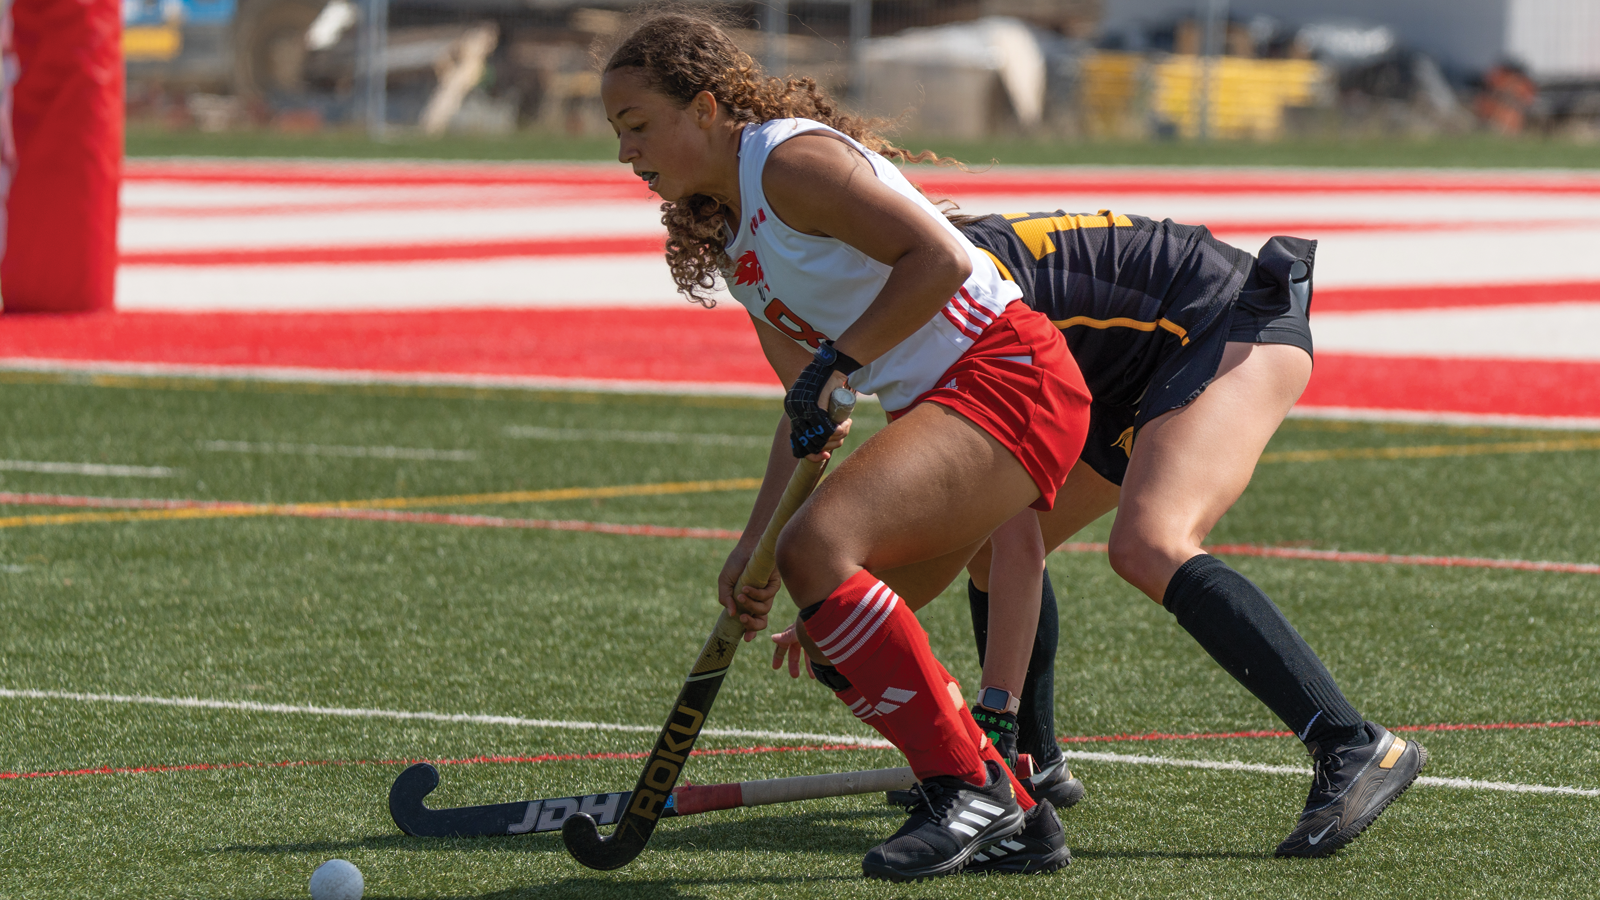 Action photo of York field hockey player Juliet Redelaar running with the ball on her stick while fending off a Waterloo defender